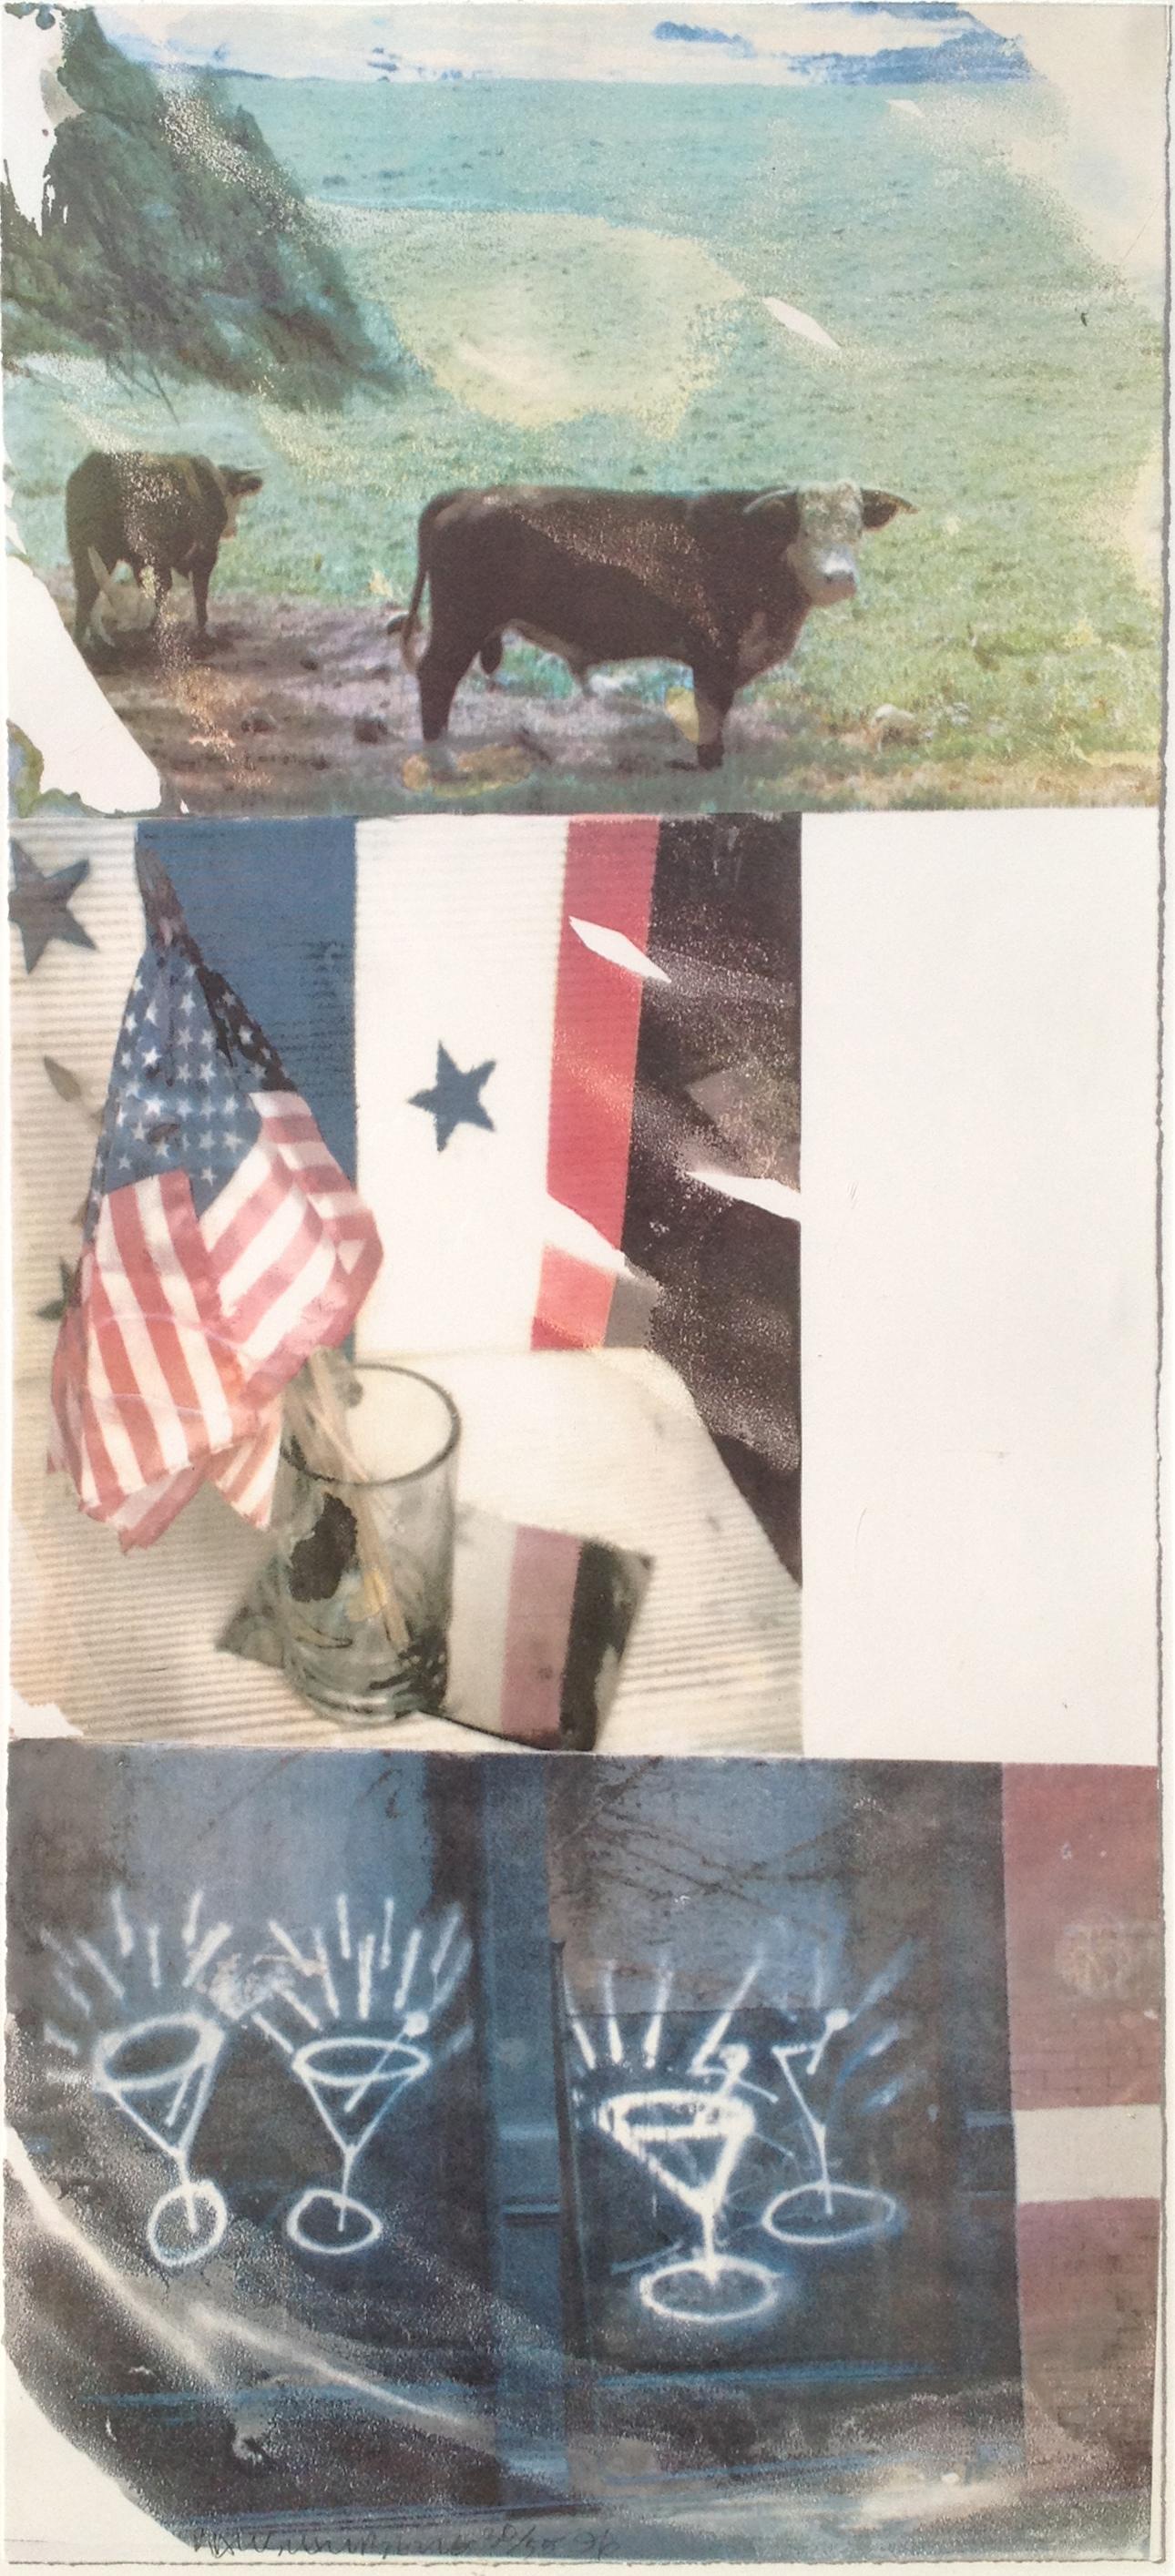 Witness (Speculations); 1996; Screenprint; 68 1/2 x 31 1/2 inches; Edition of 55 - Print by Robert Rauschenberg